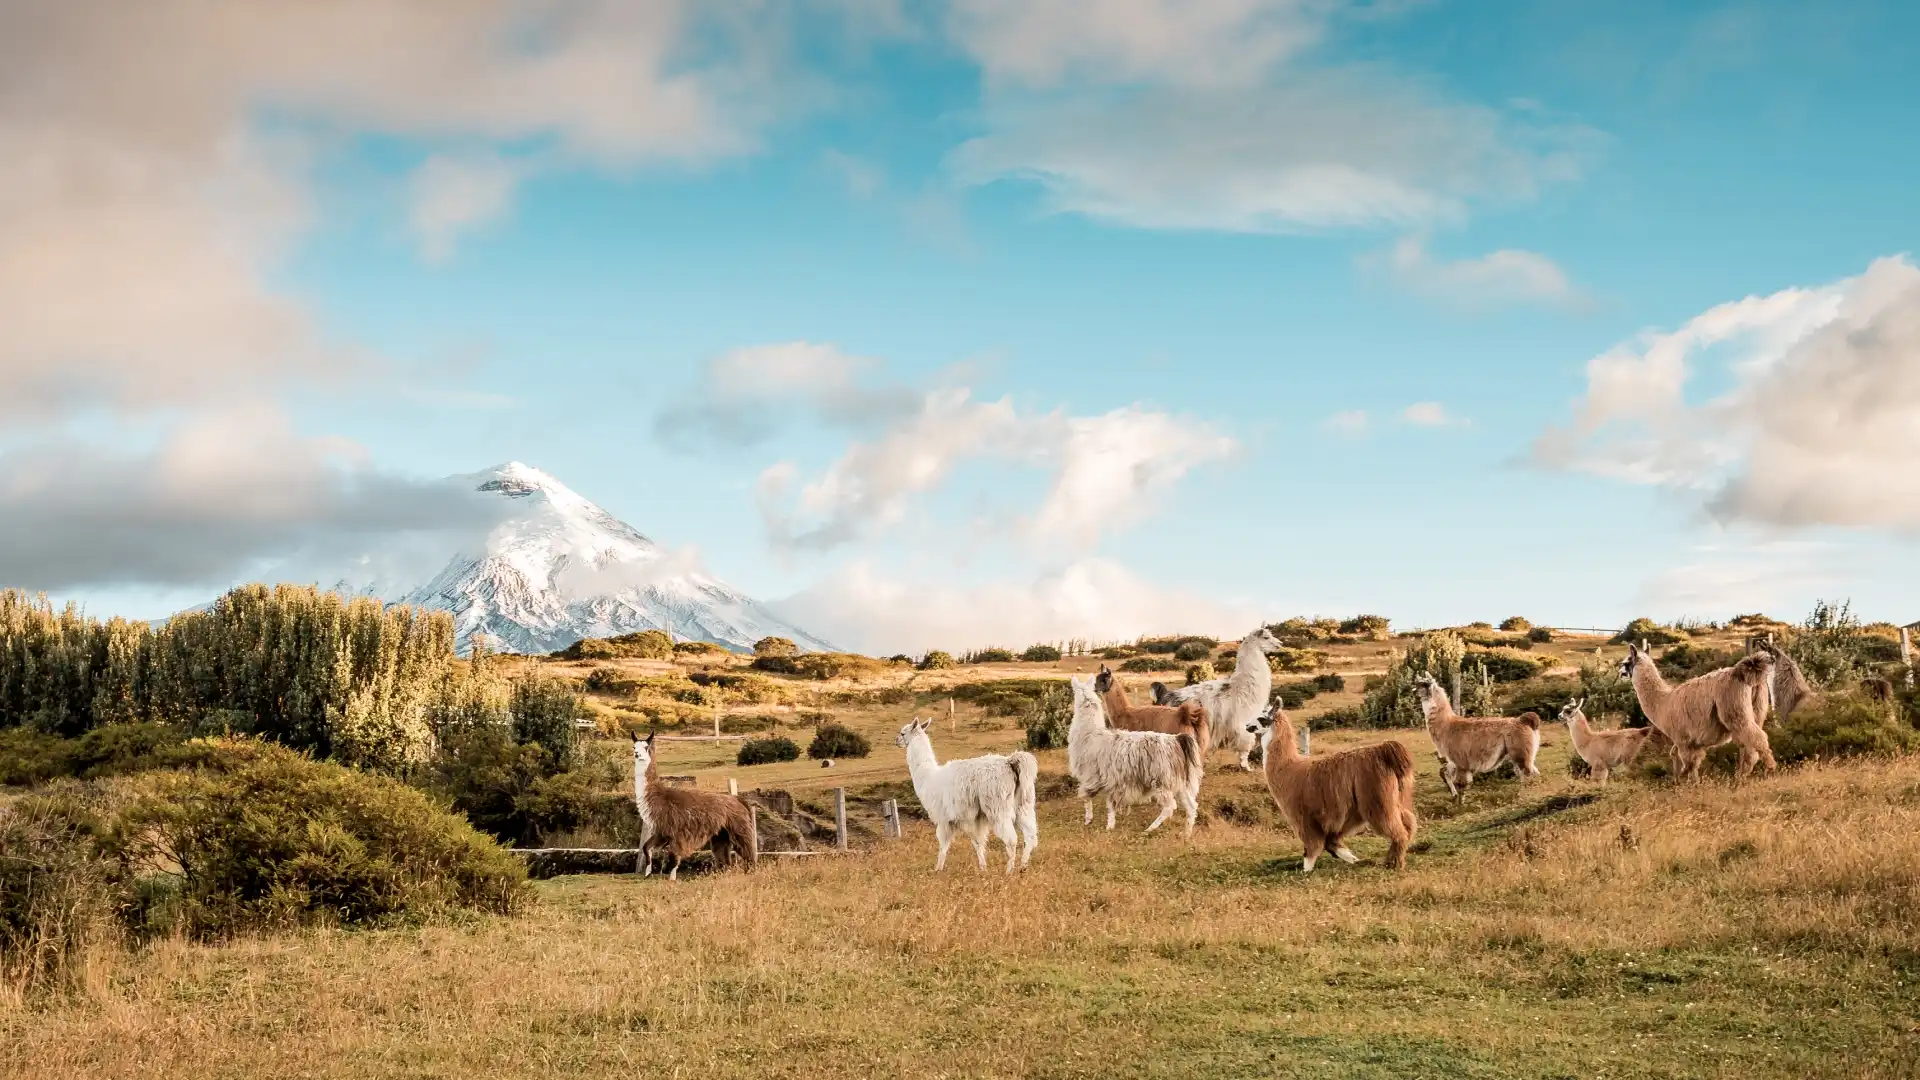 Llamas grazing in Cotopaxi National Park with a snowy mountain backdrop - related to Casa Gangotena, Boutique Hotel in Quito.